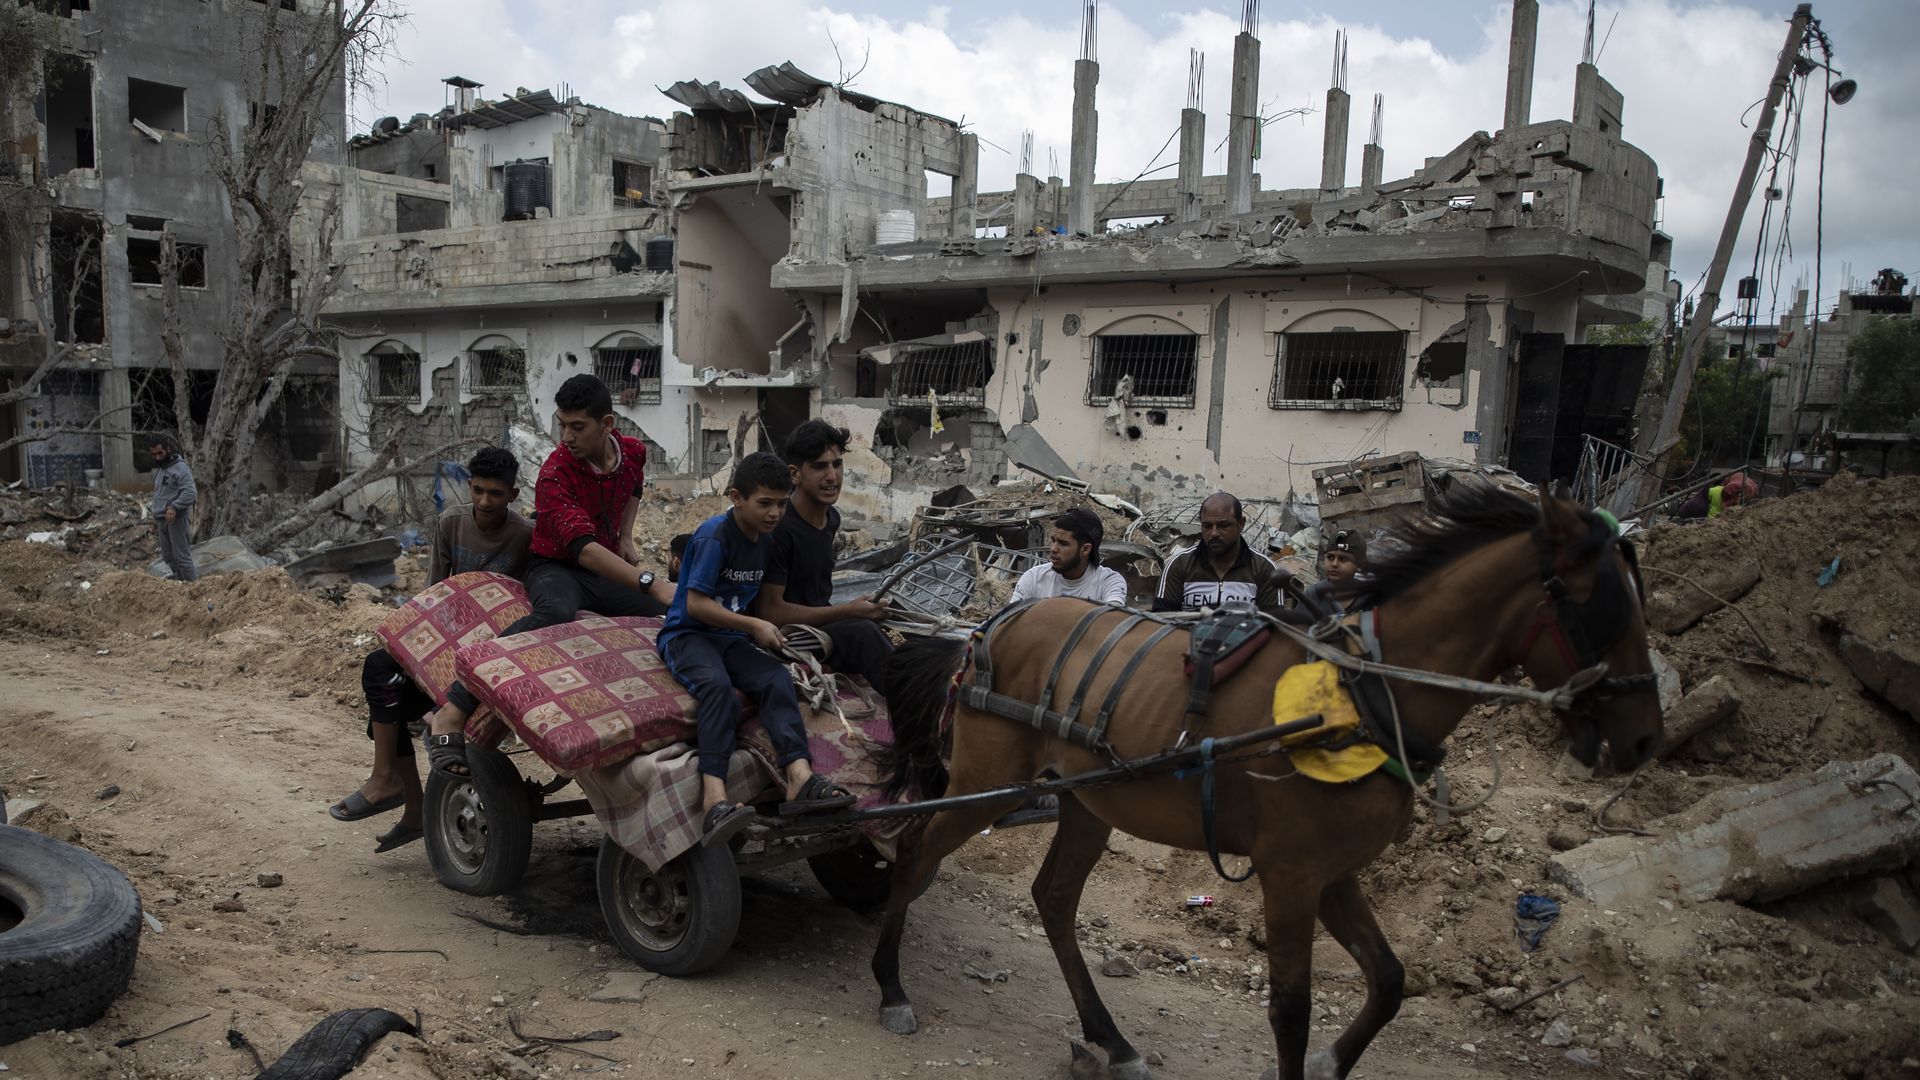 On a horse cart loaded with belongings, Palestinians return today to their home in the town of Beit Hanoun, northern Gaza Strip